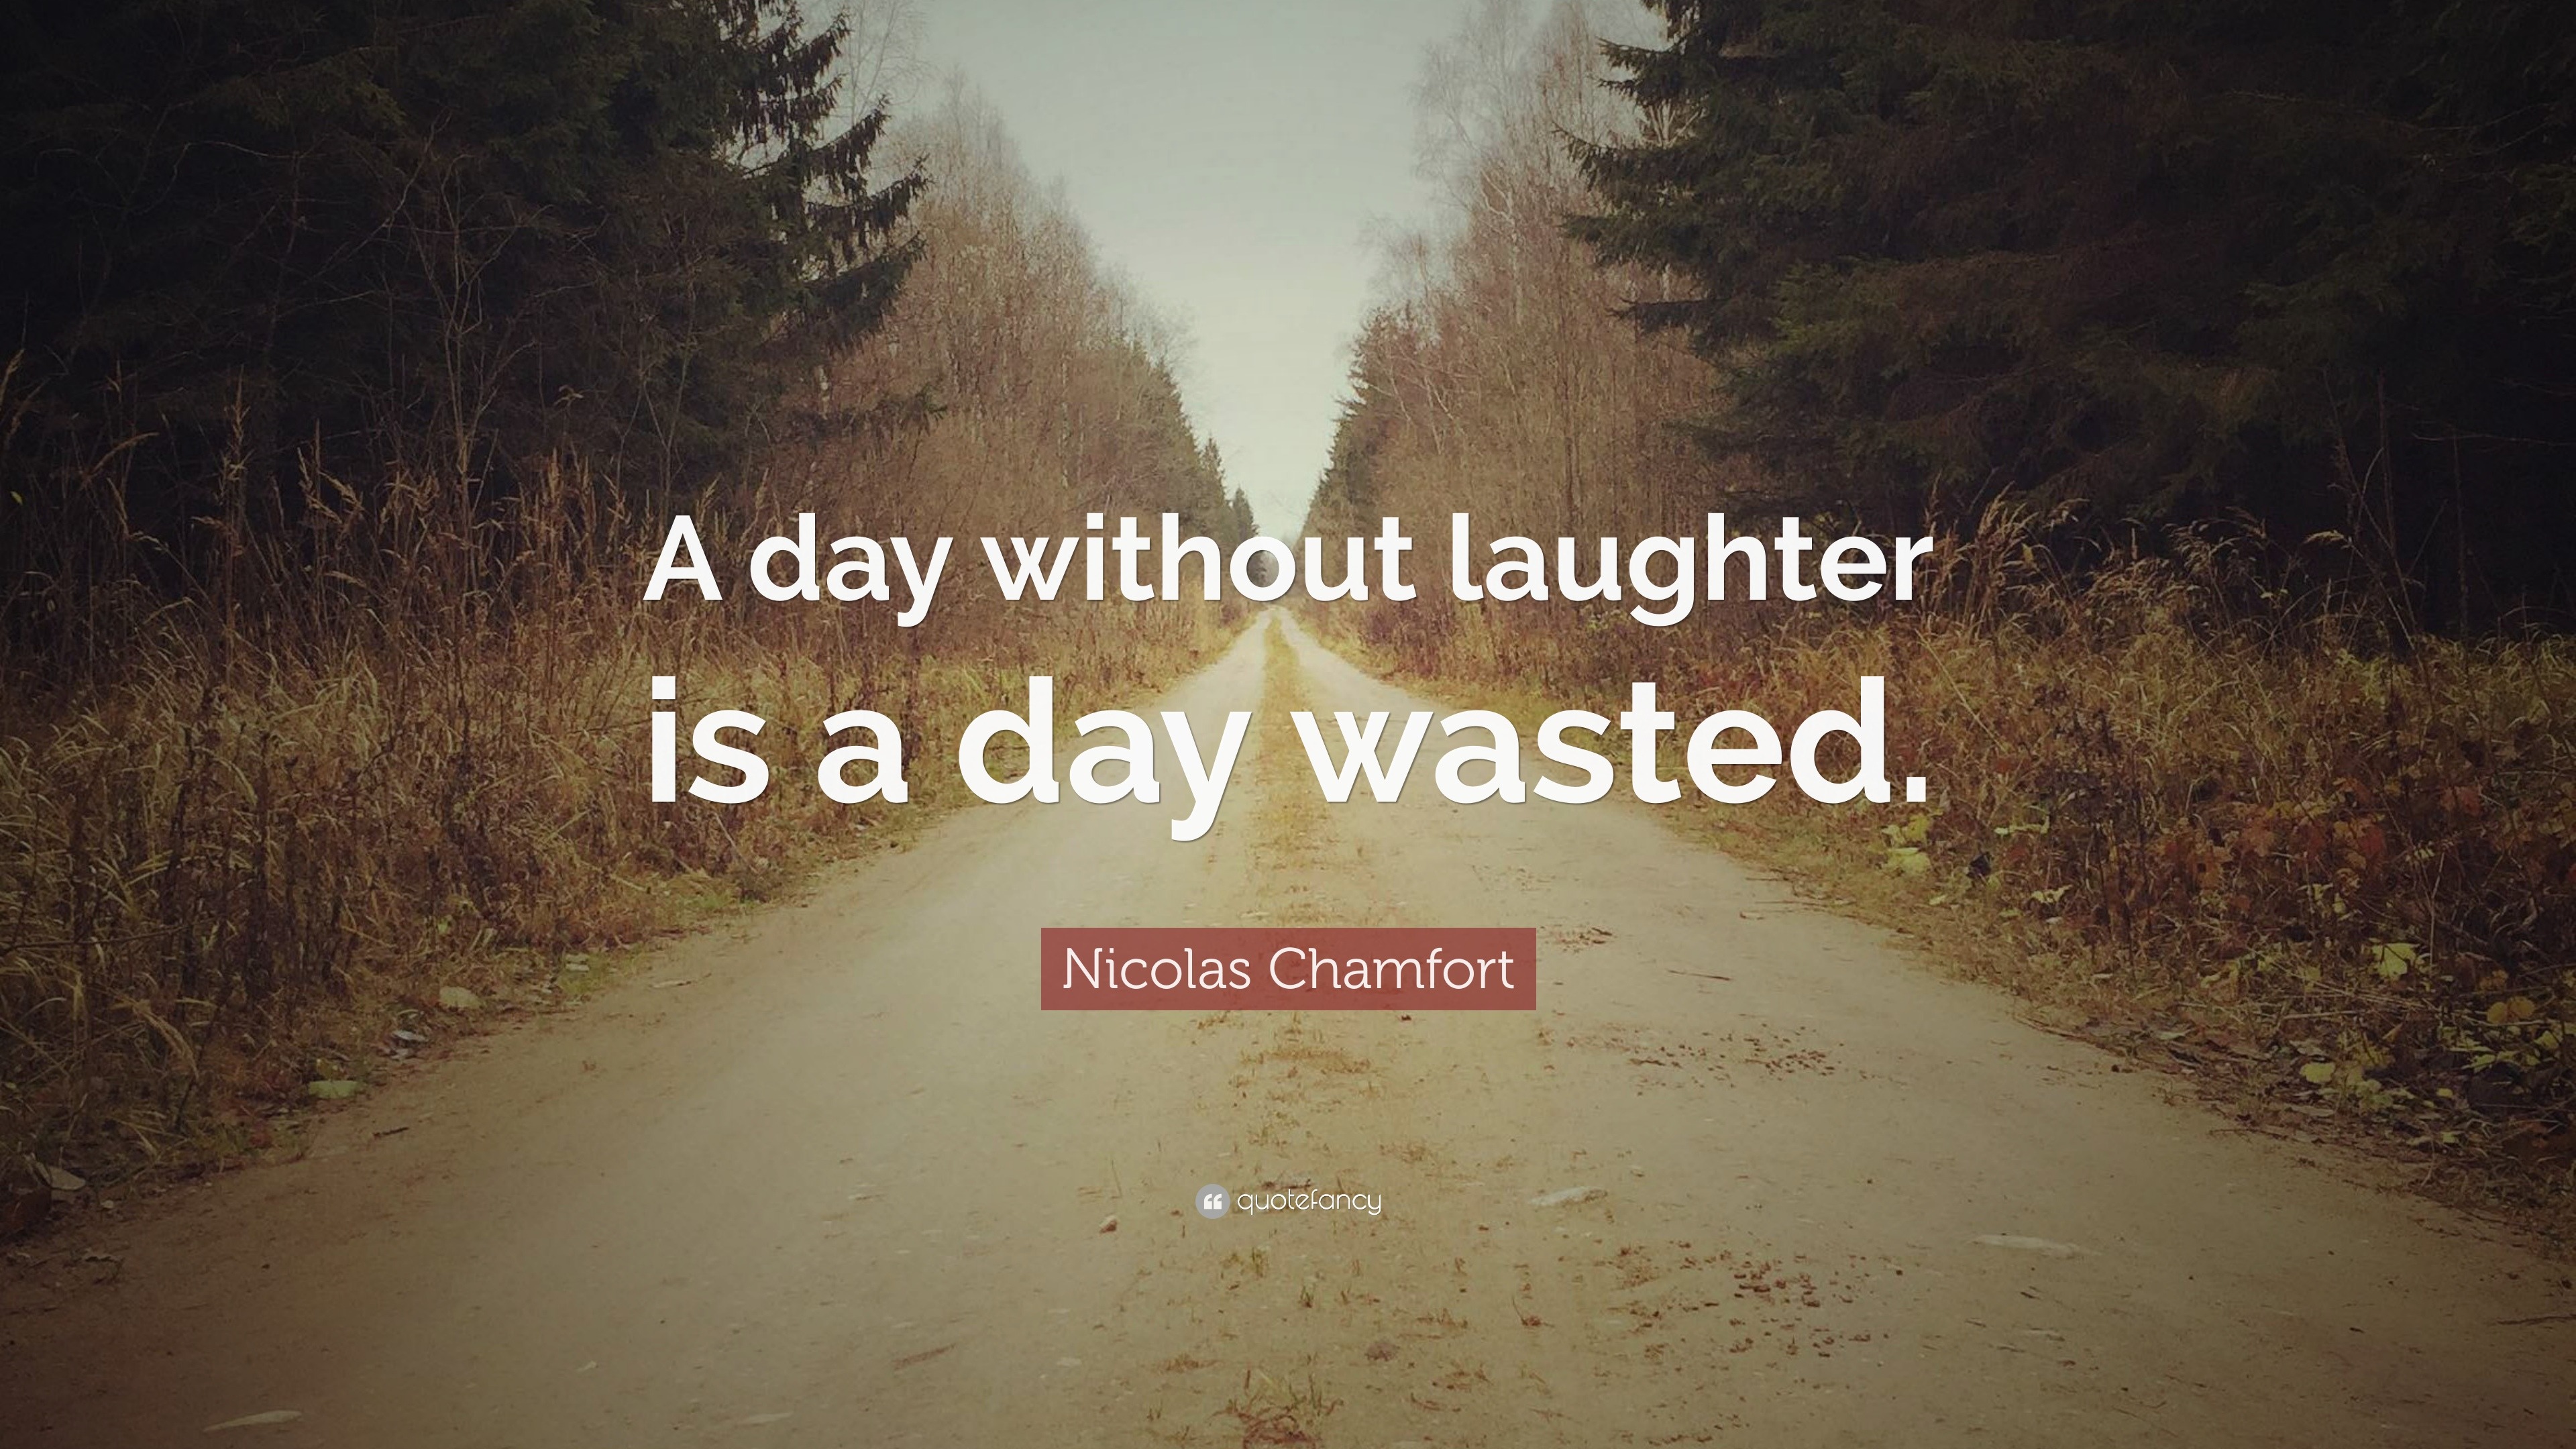 nicolas-chamfort-quote-a-day-without-laughter-is-a-day-wasted